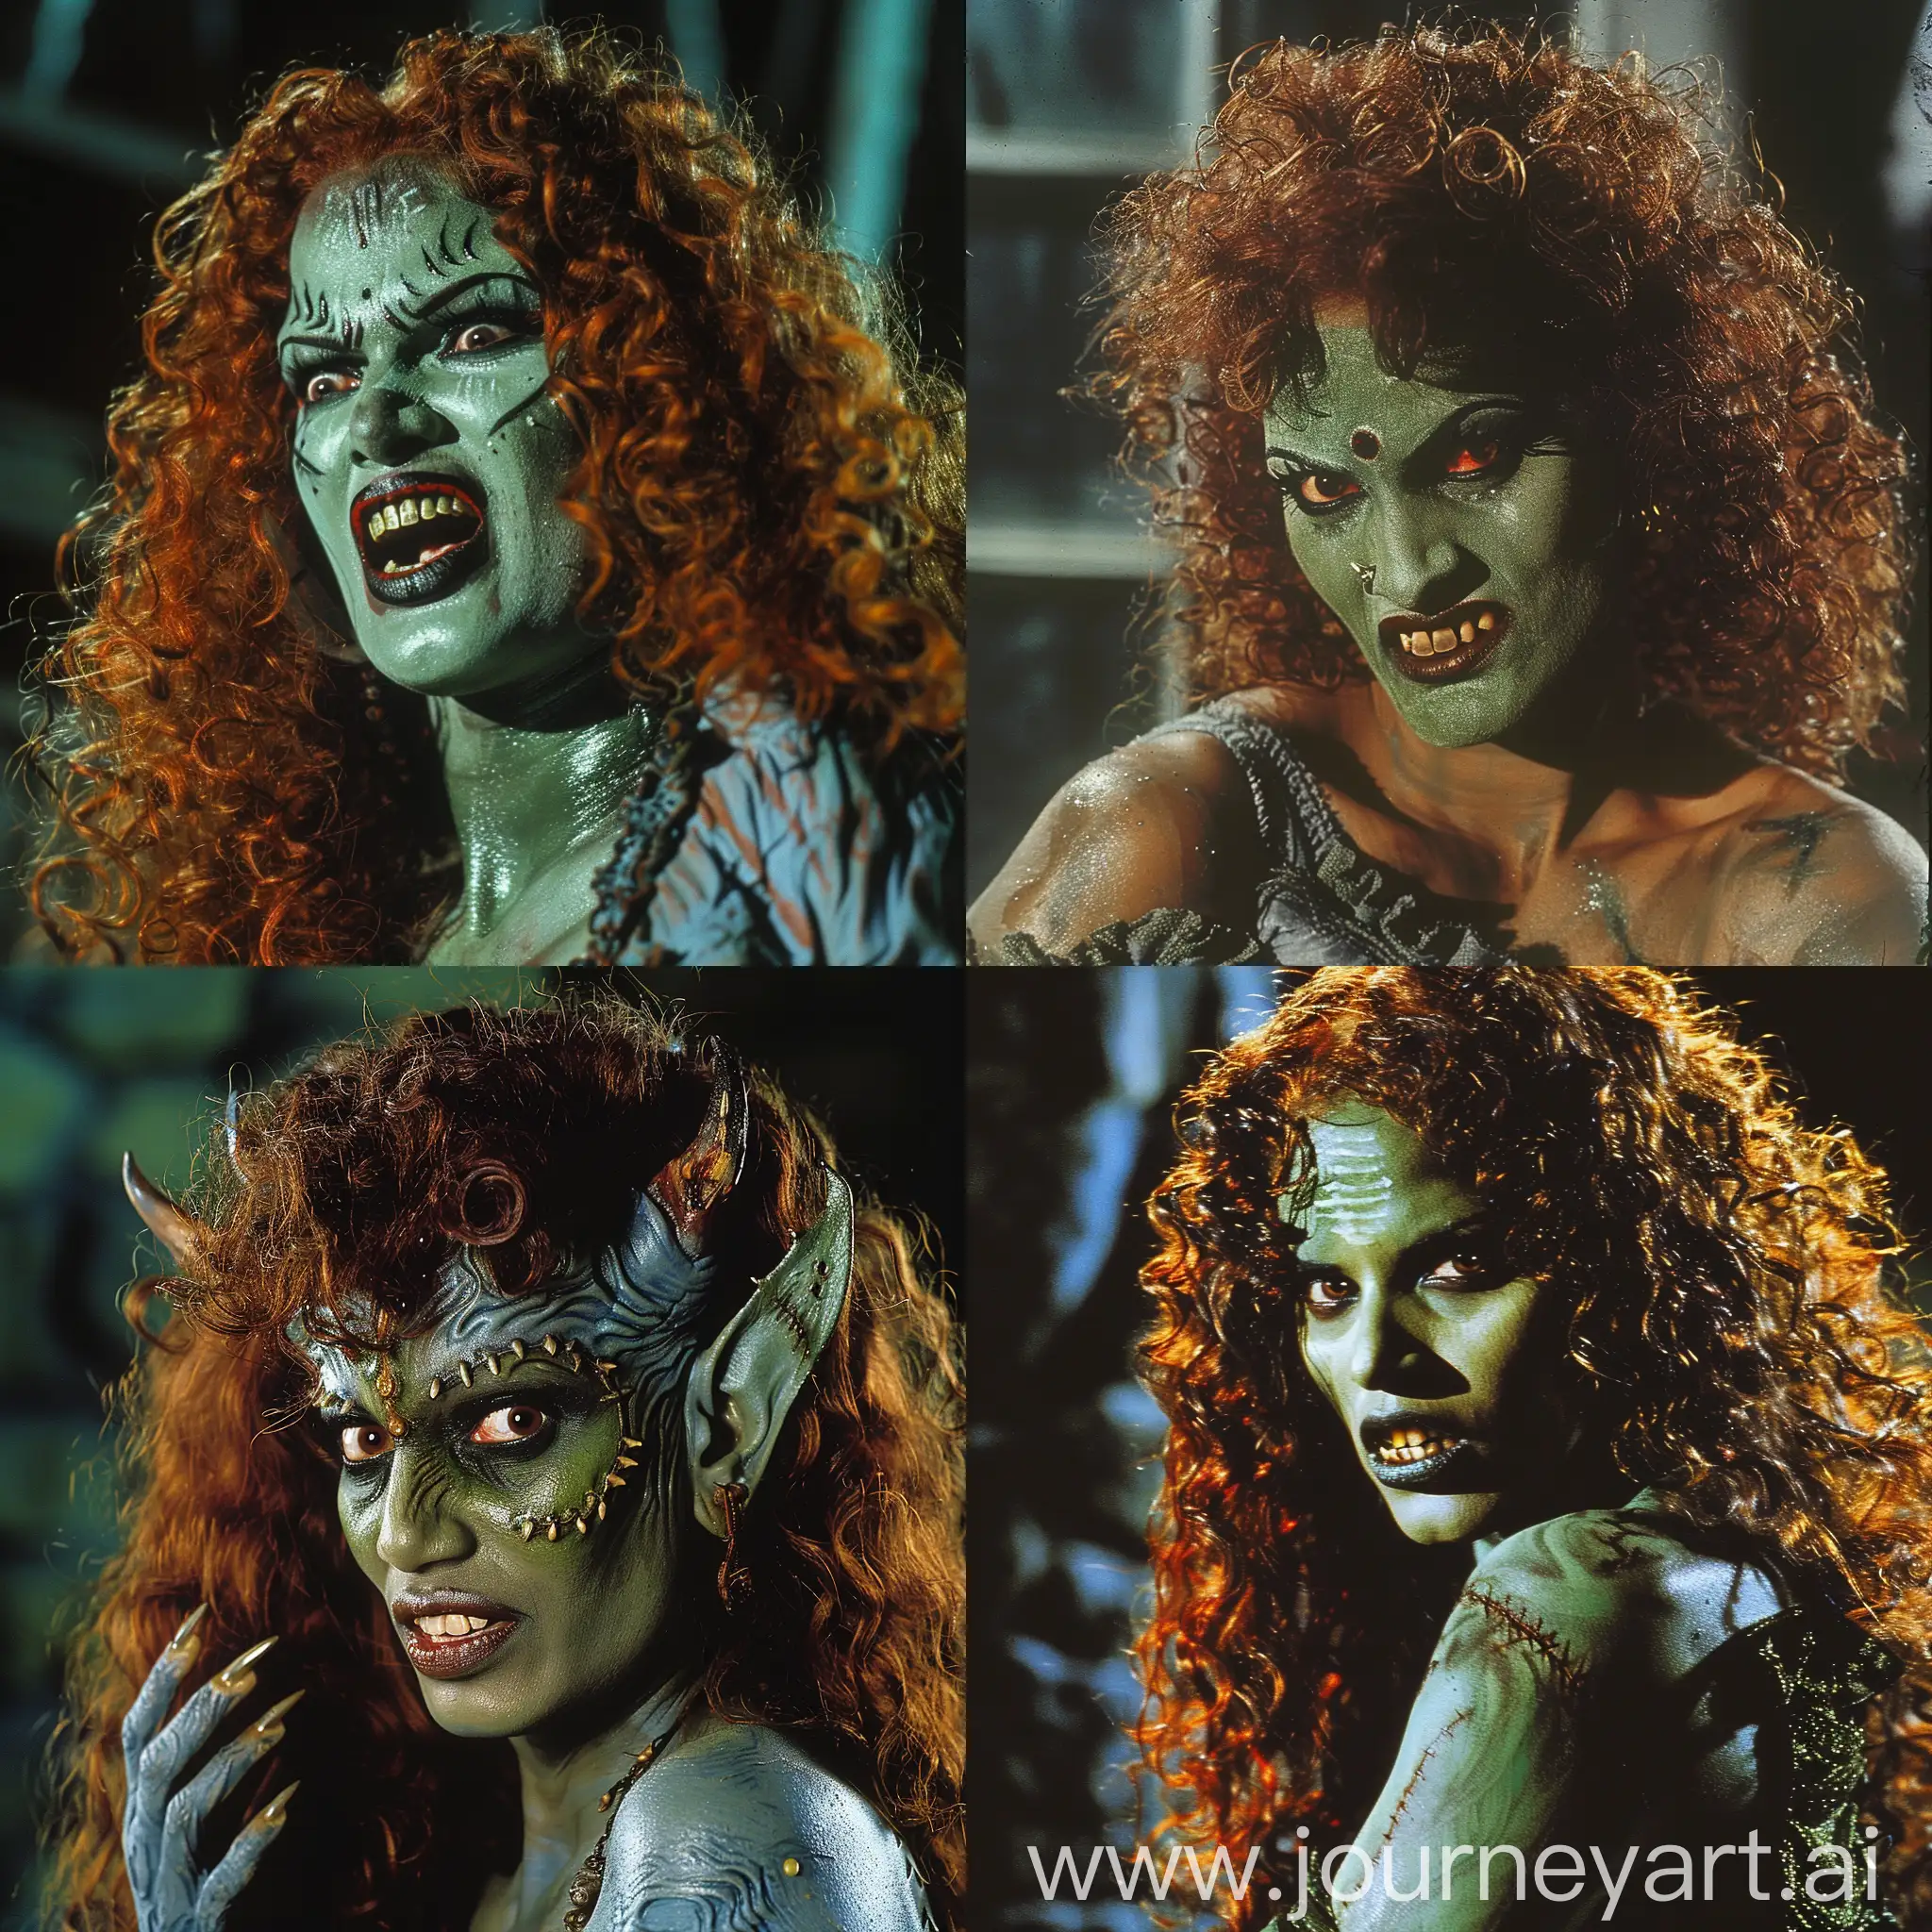 fit female Malayali demon with dark greyish-green skin, curly redhead, attractive green face, enlarged sharp eyebrow ridges and cheekbones, vampire fangs, special makeup effects by Tom Savini, half body shot, film scene from a 1980s horror movie like Evil Dead by Sam Raimi and Demoni by Lamberto Bava, dehydrated